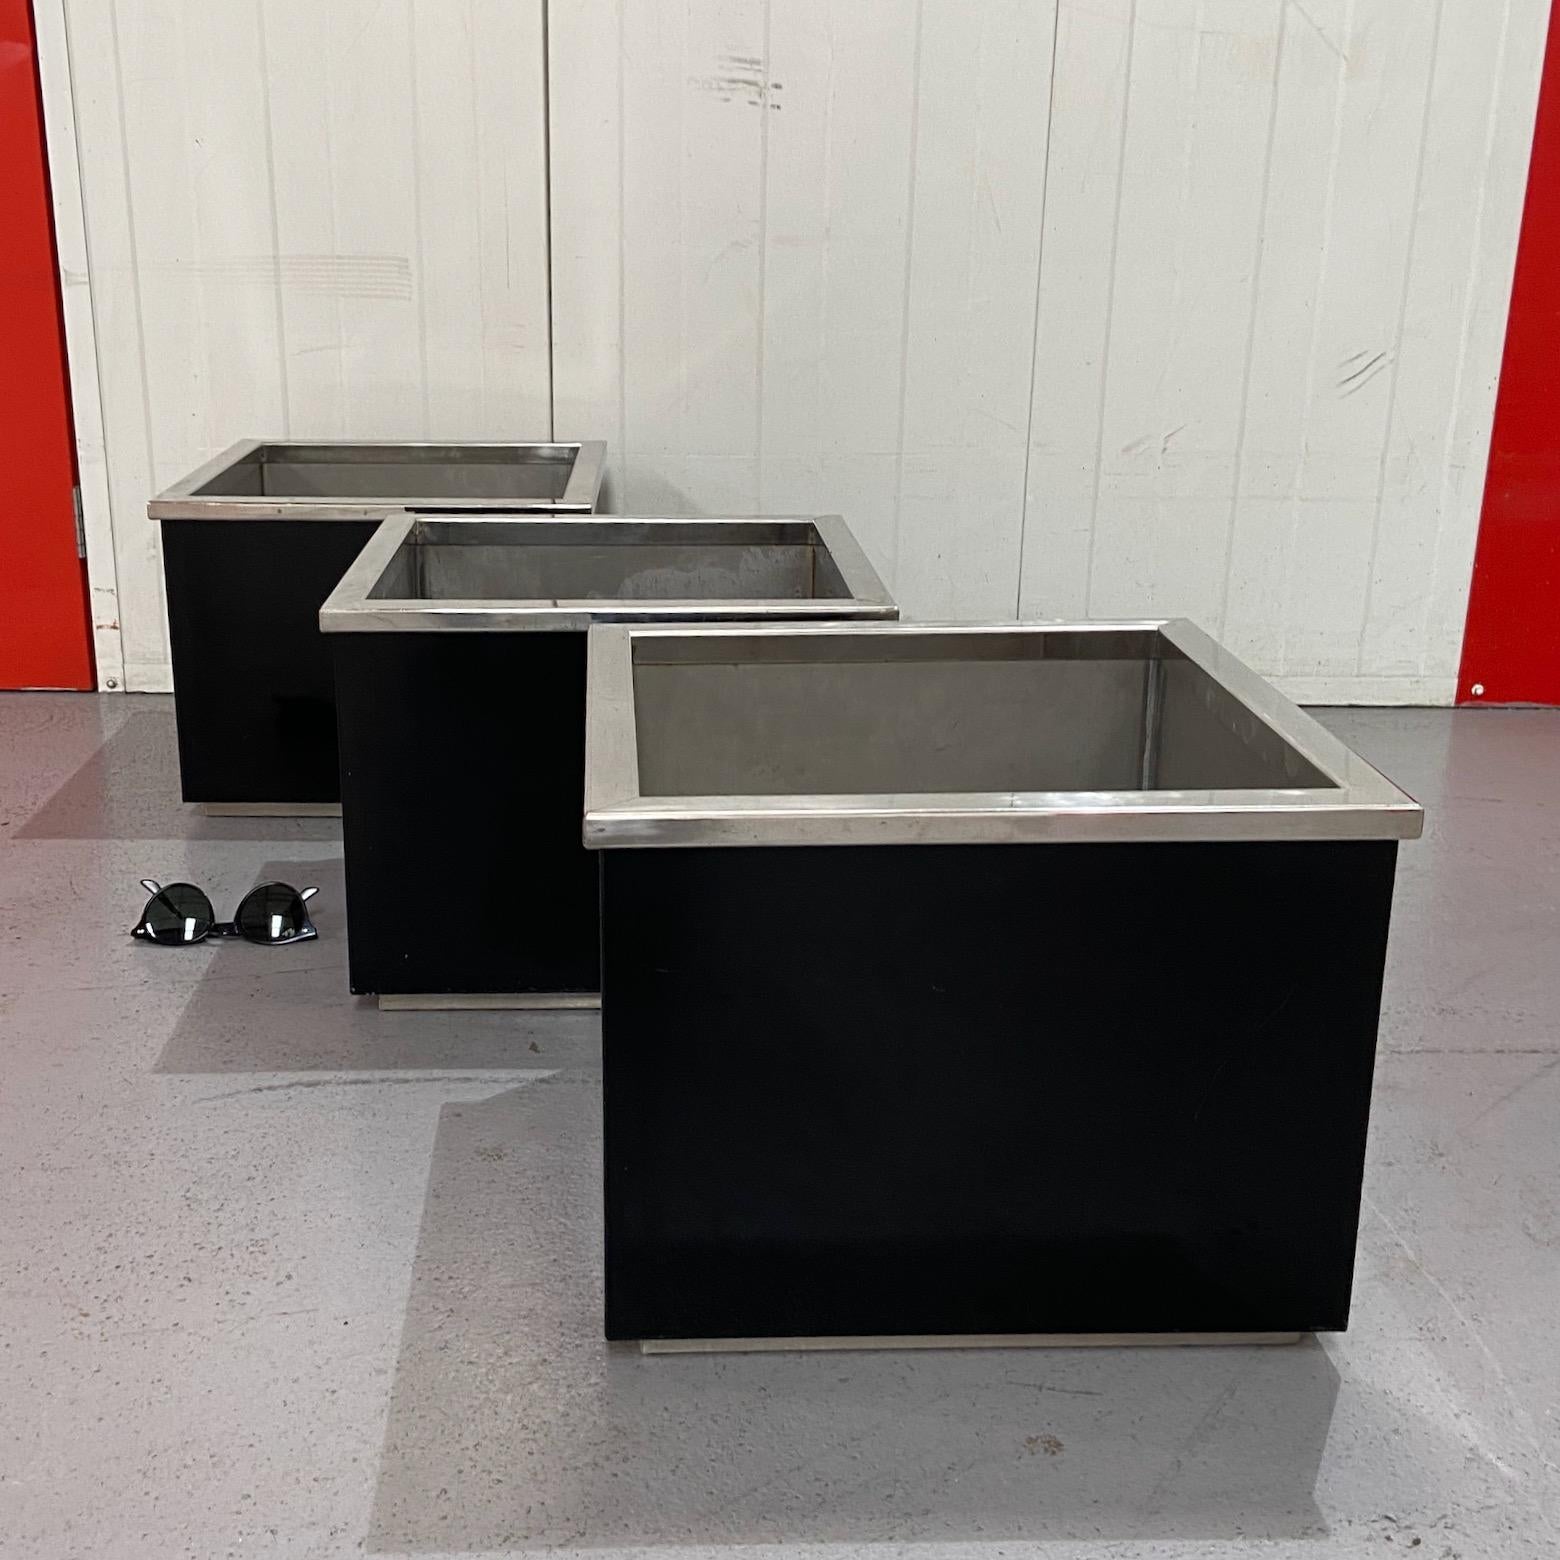 1960s-70s black enamel and chrome metal cubic planters, manner of Willy Rizzo For Sale 2